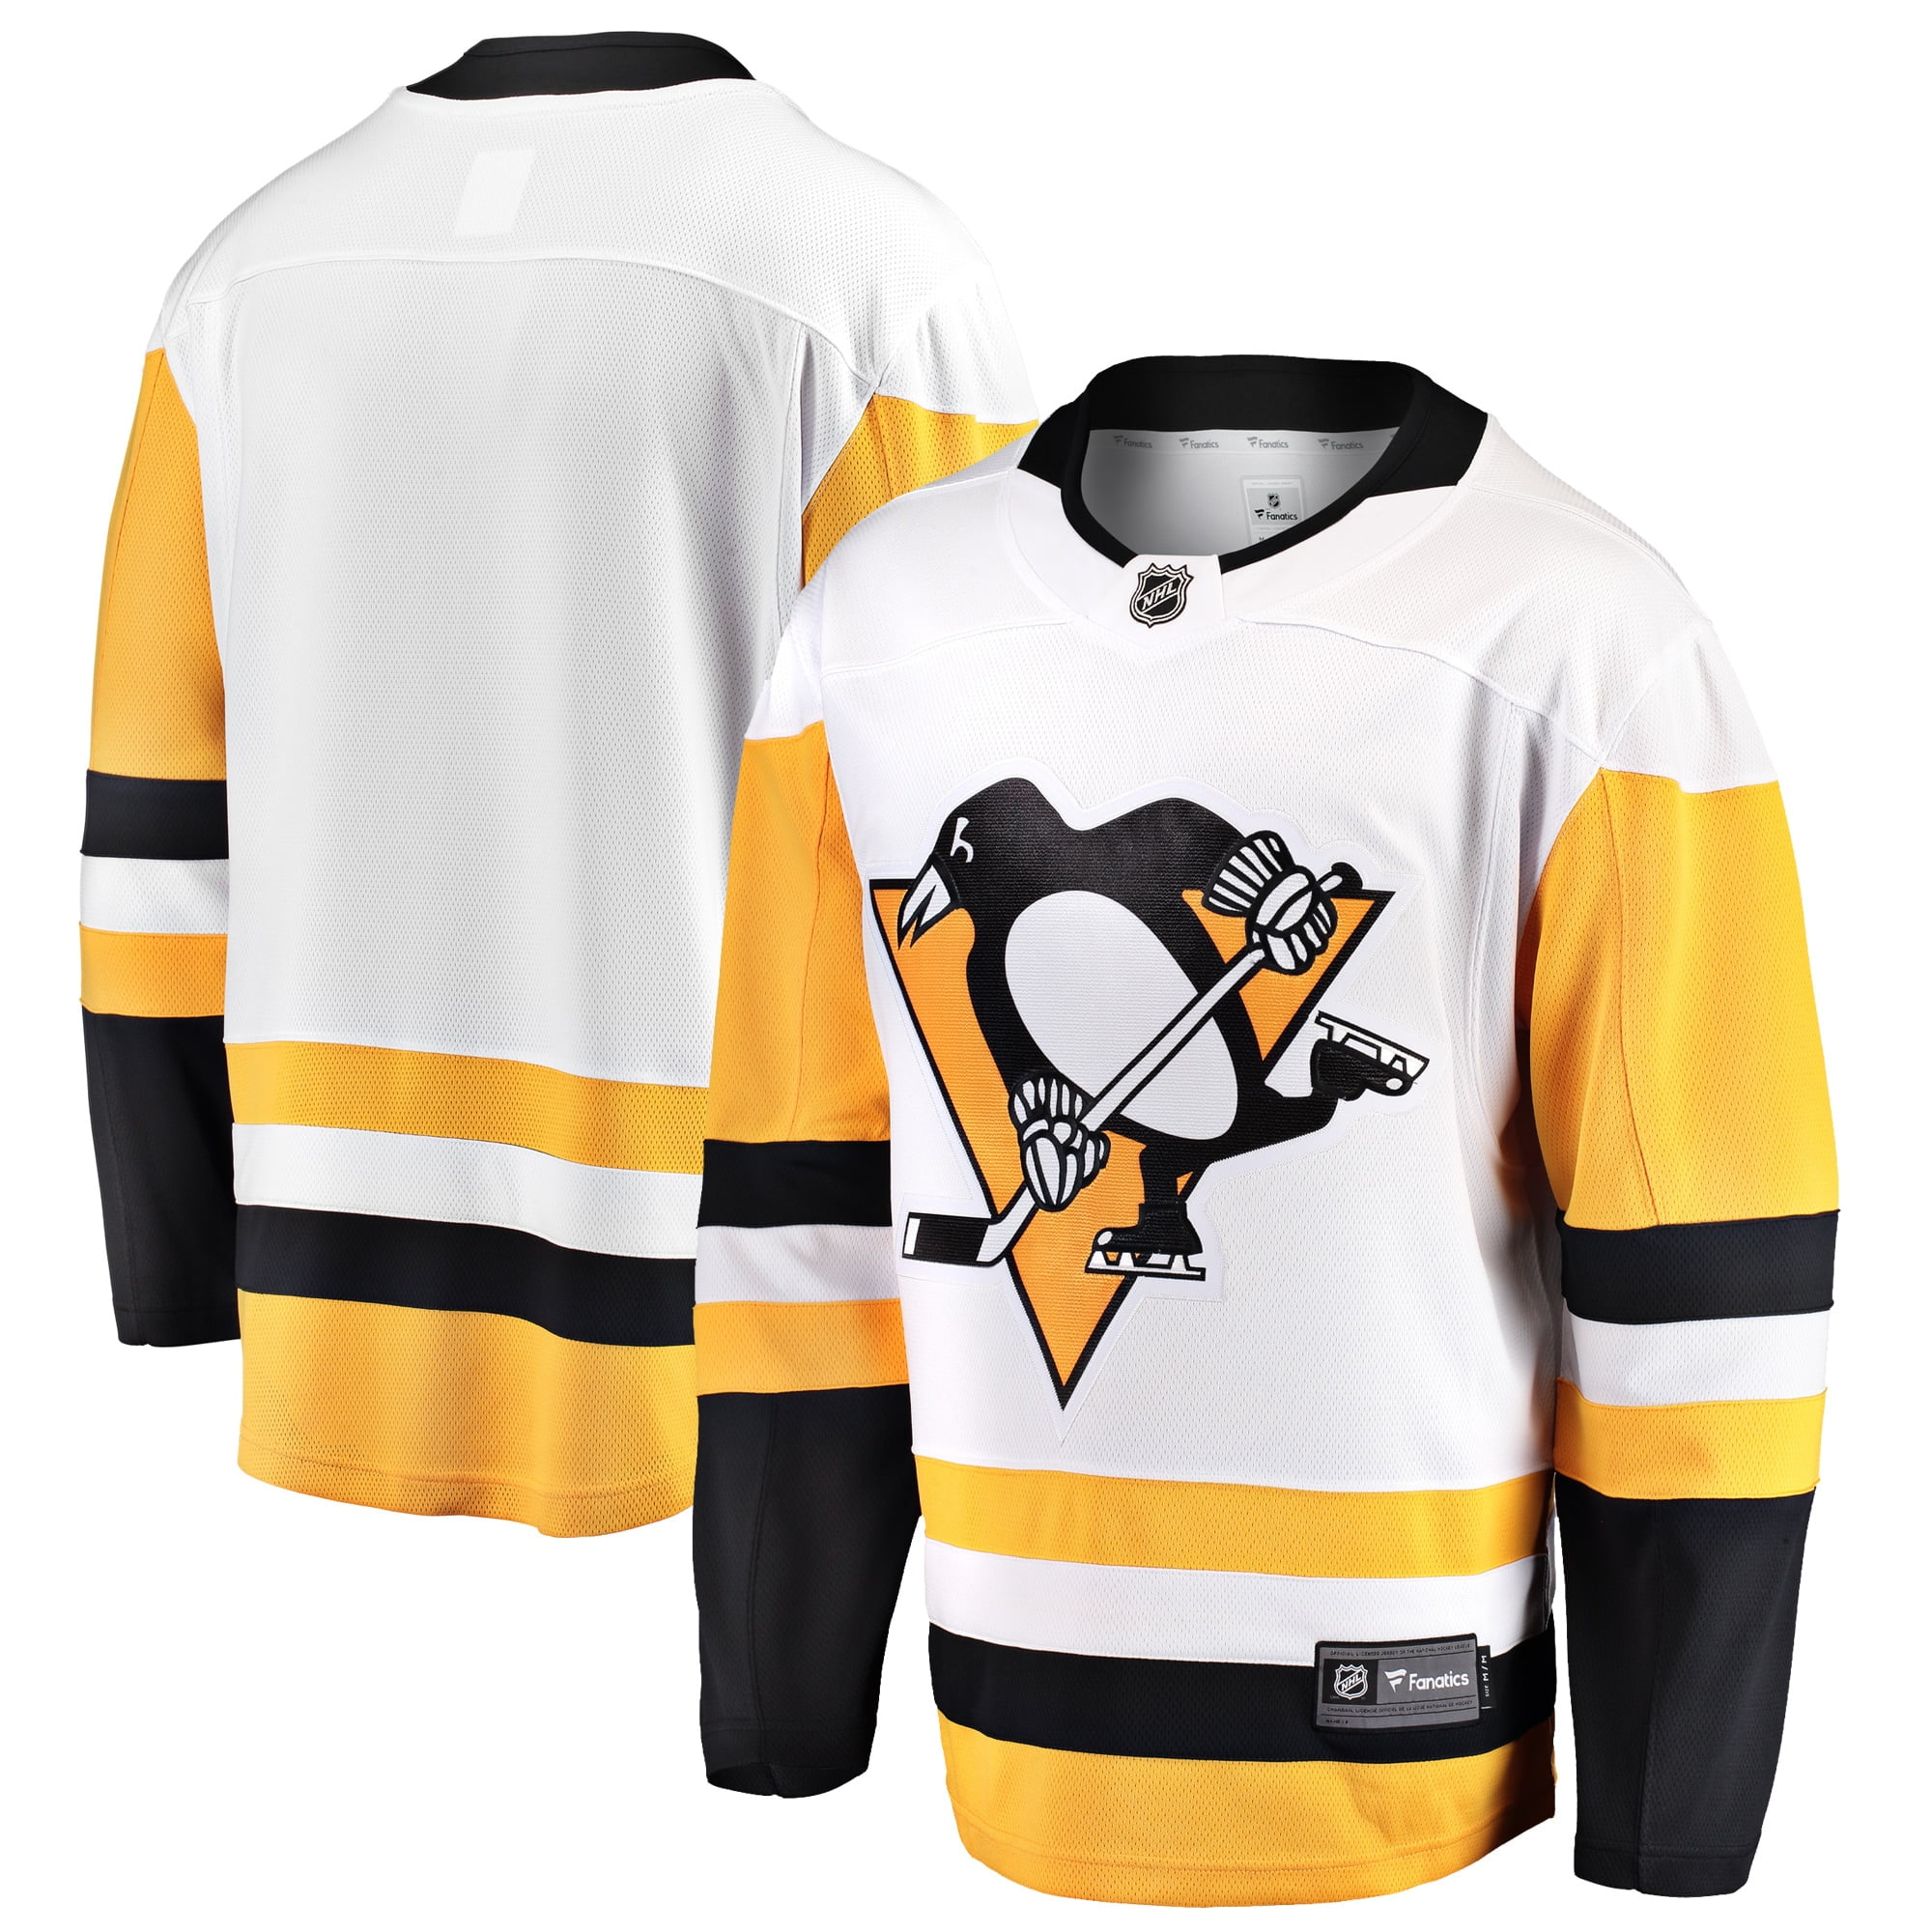 pittsburgh penguins new away jersey